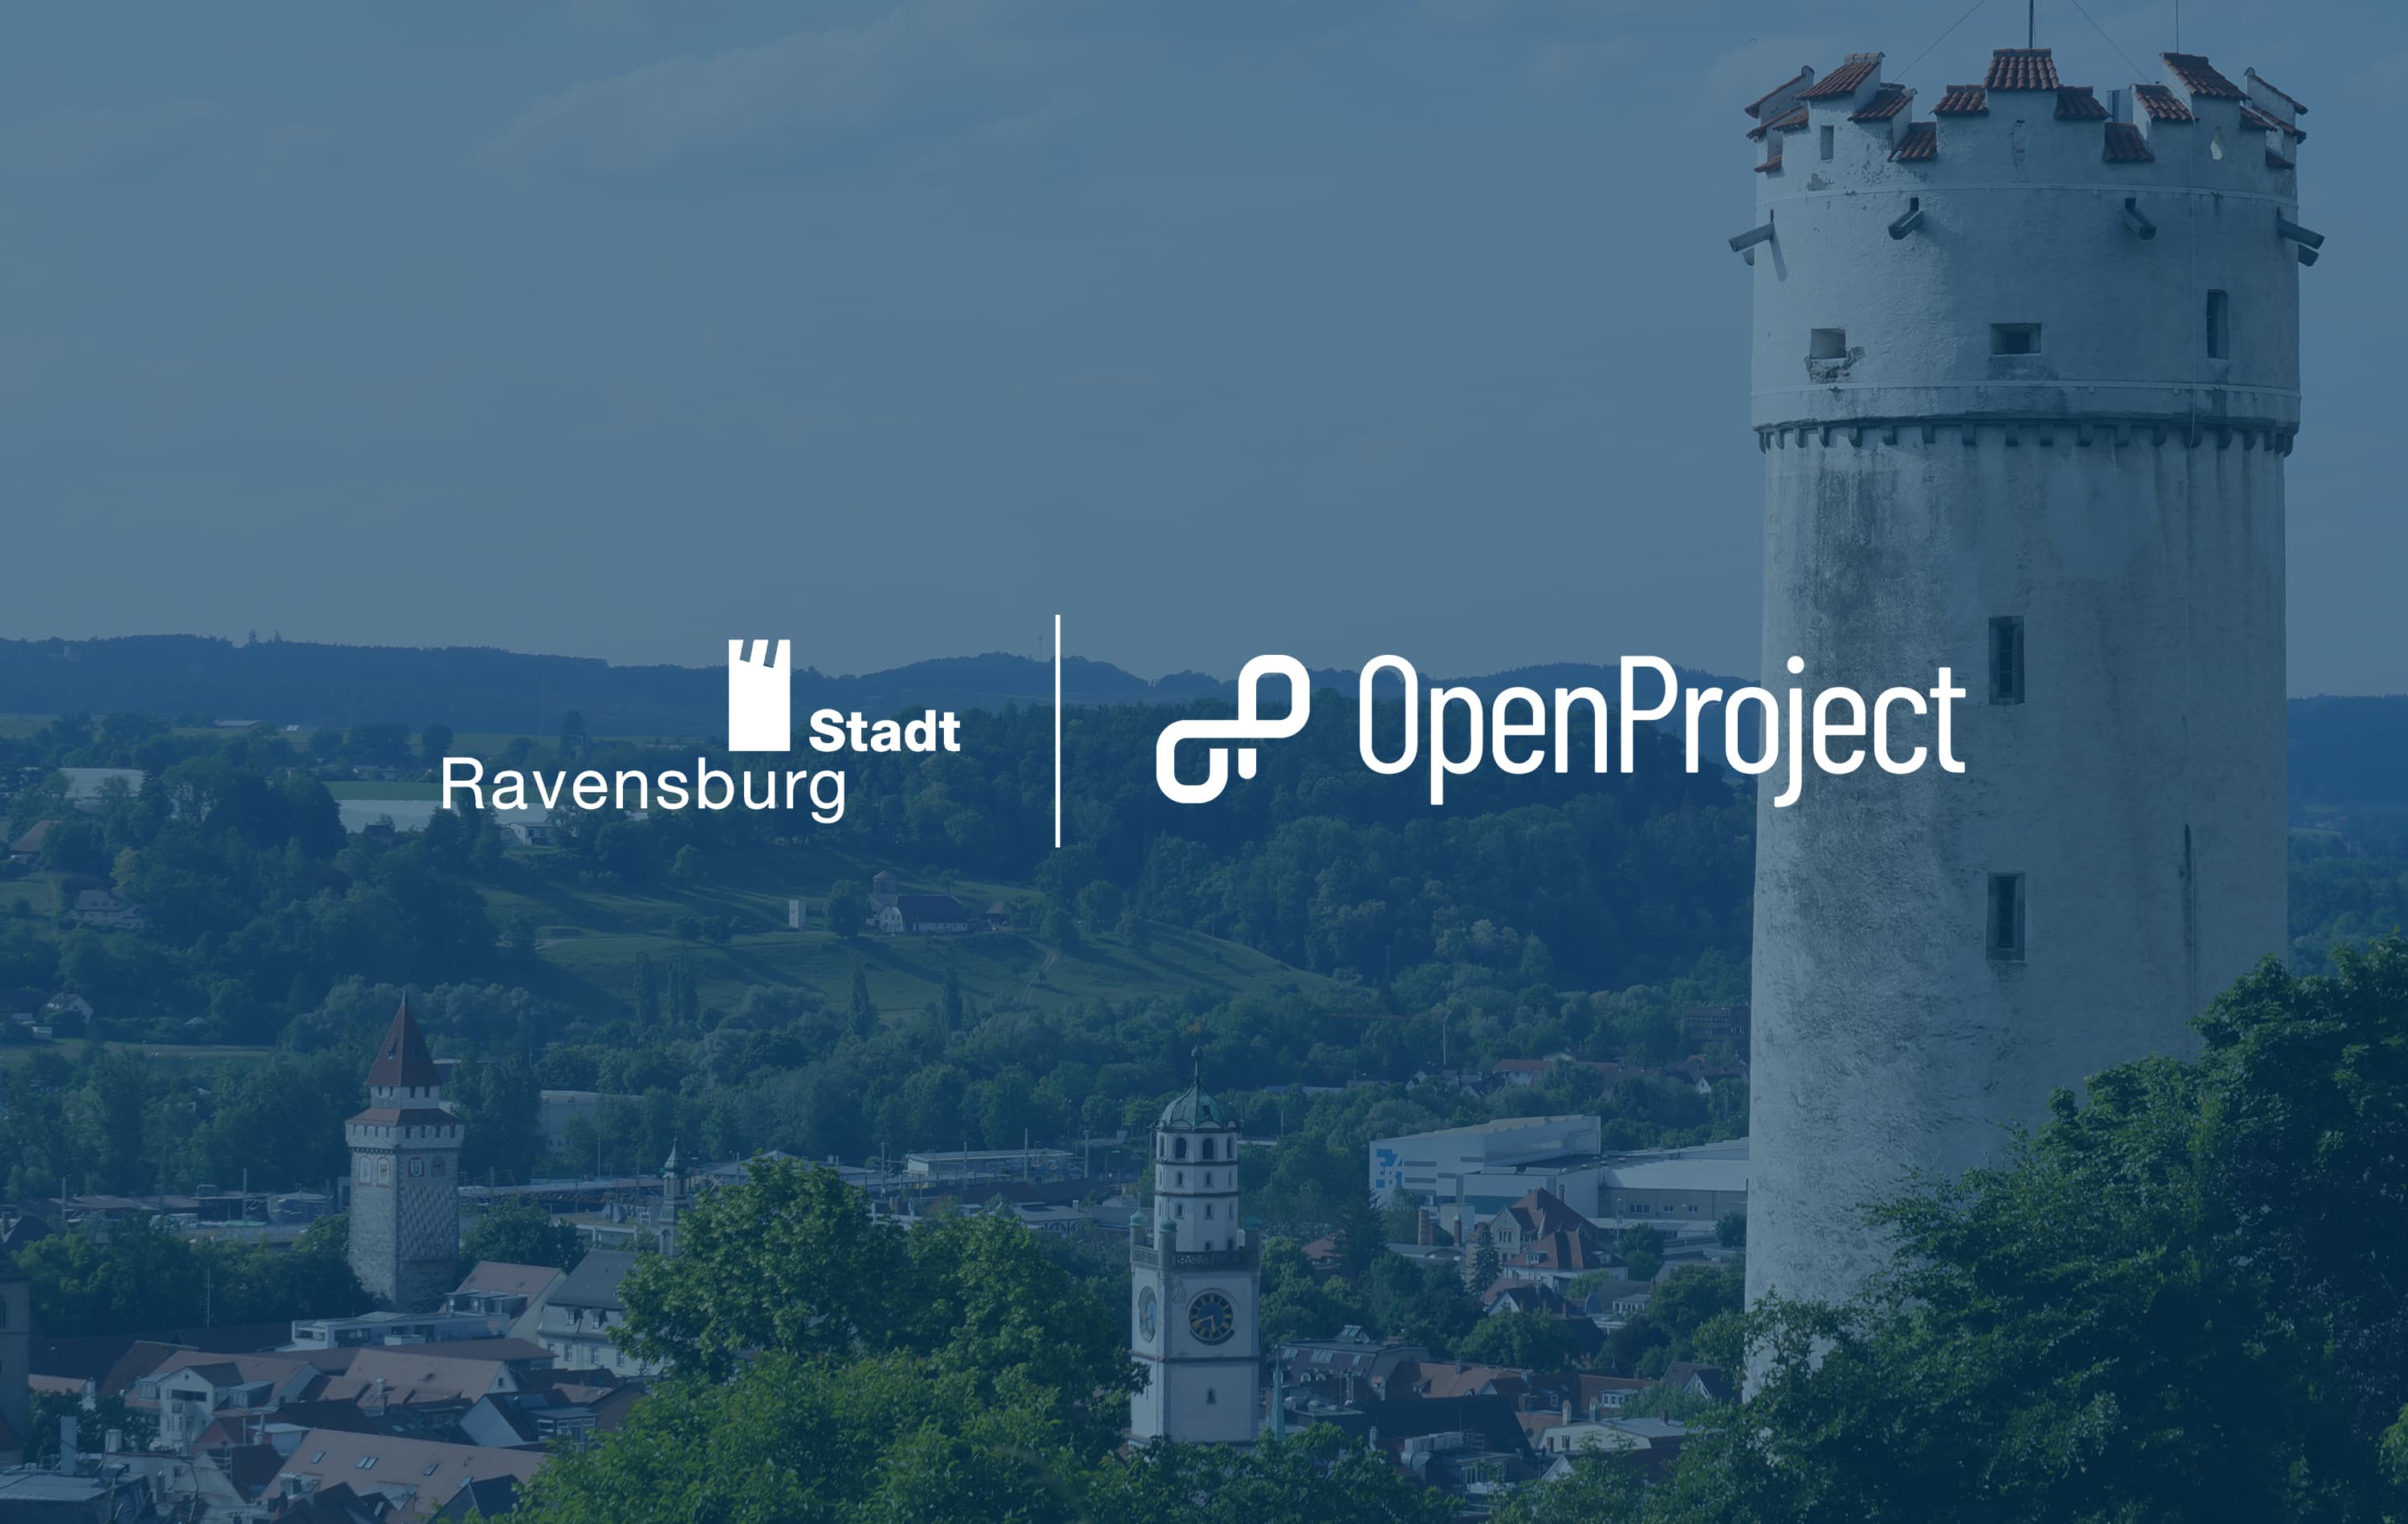 Workload transparency for the City of Ravensburg